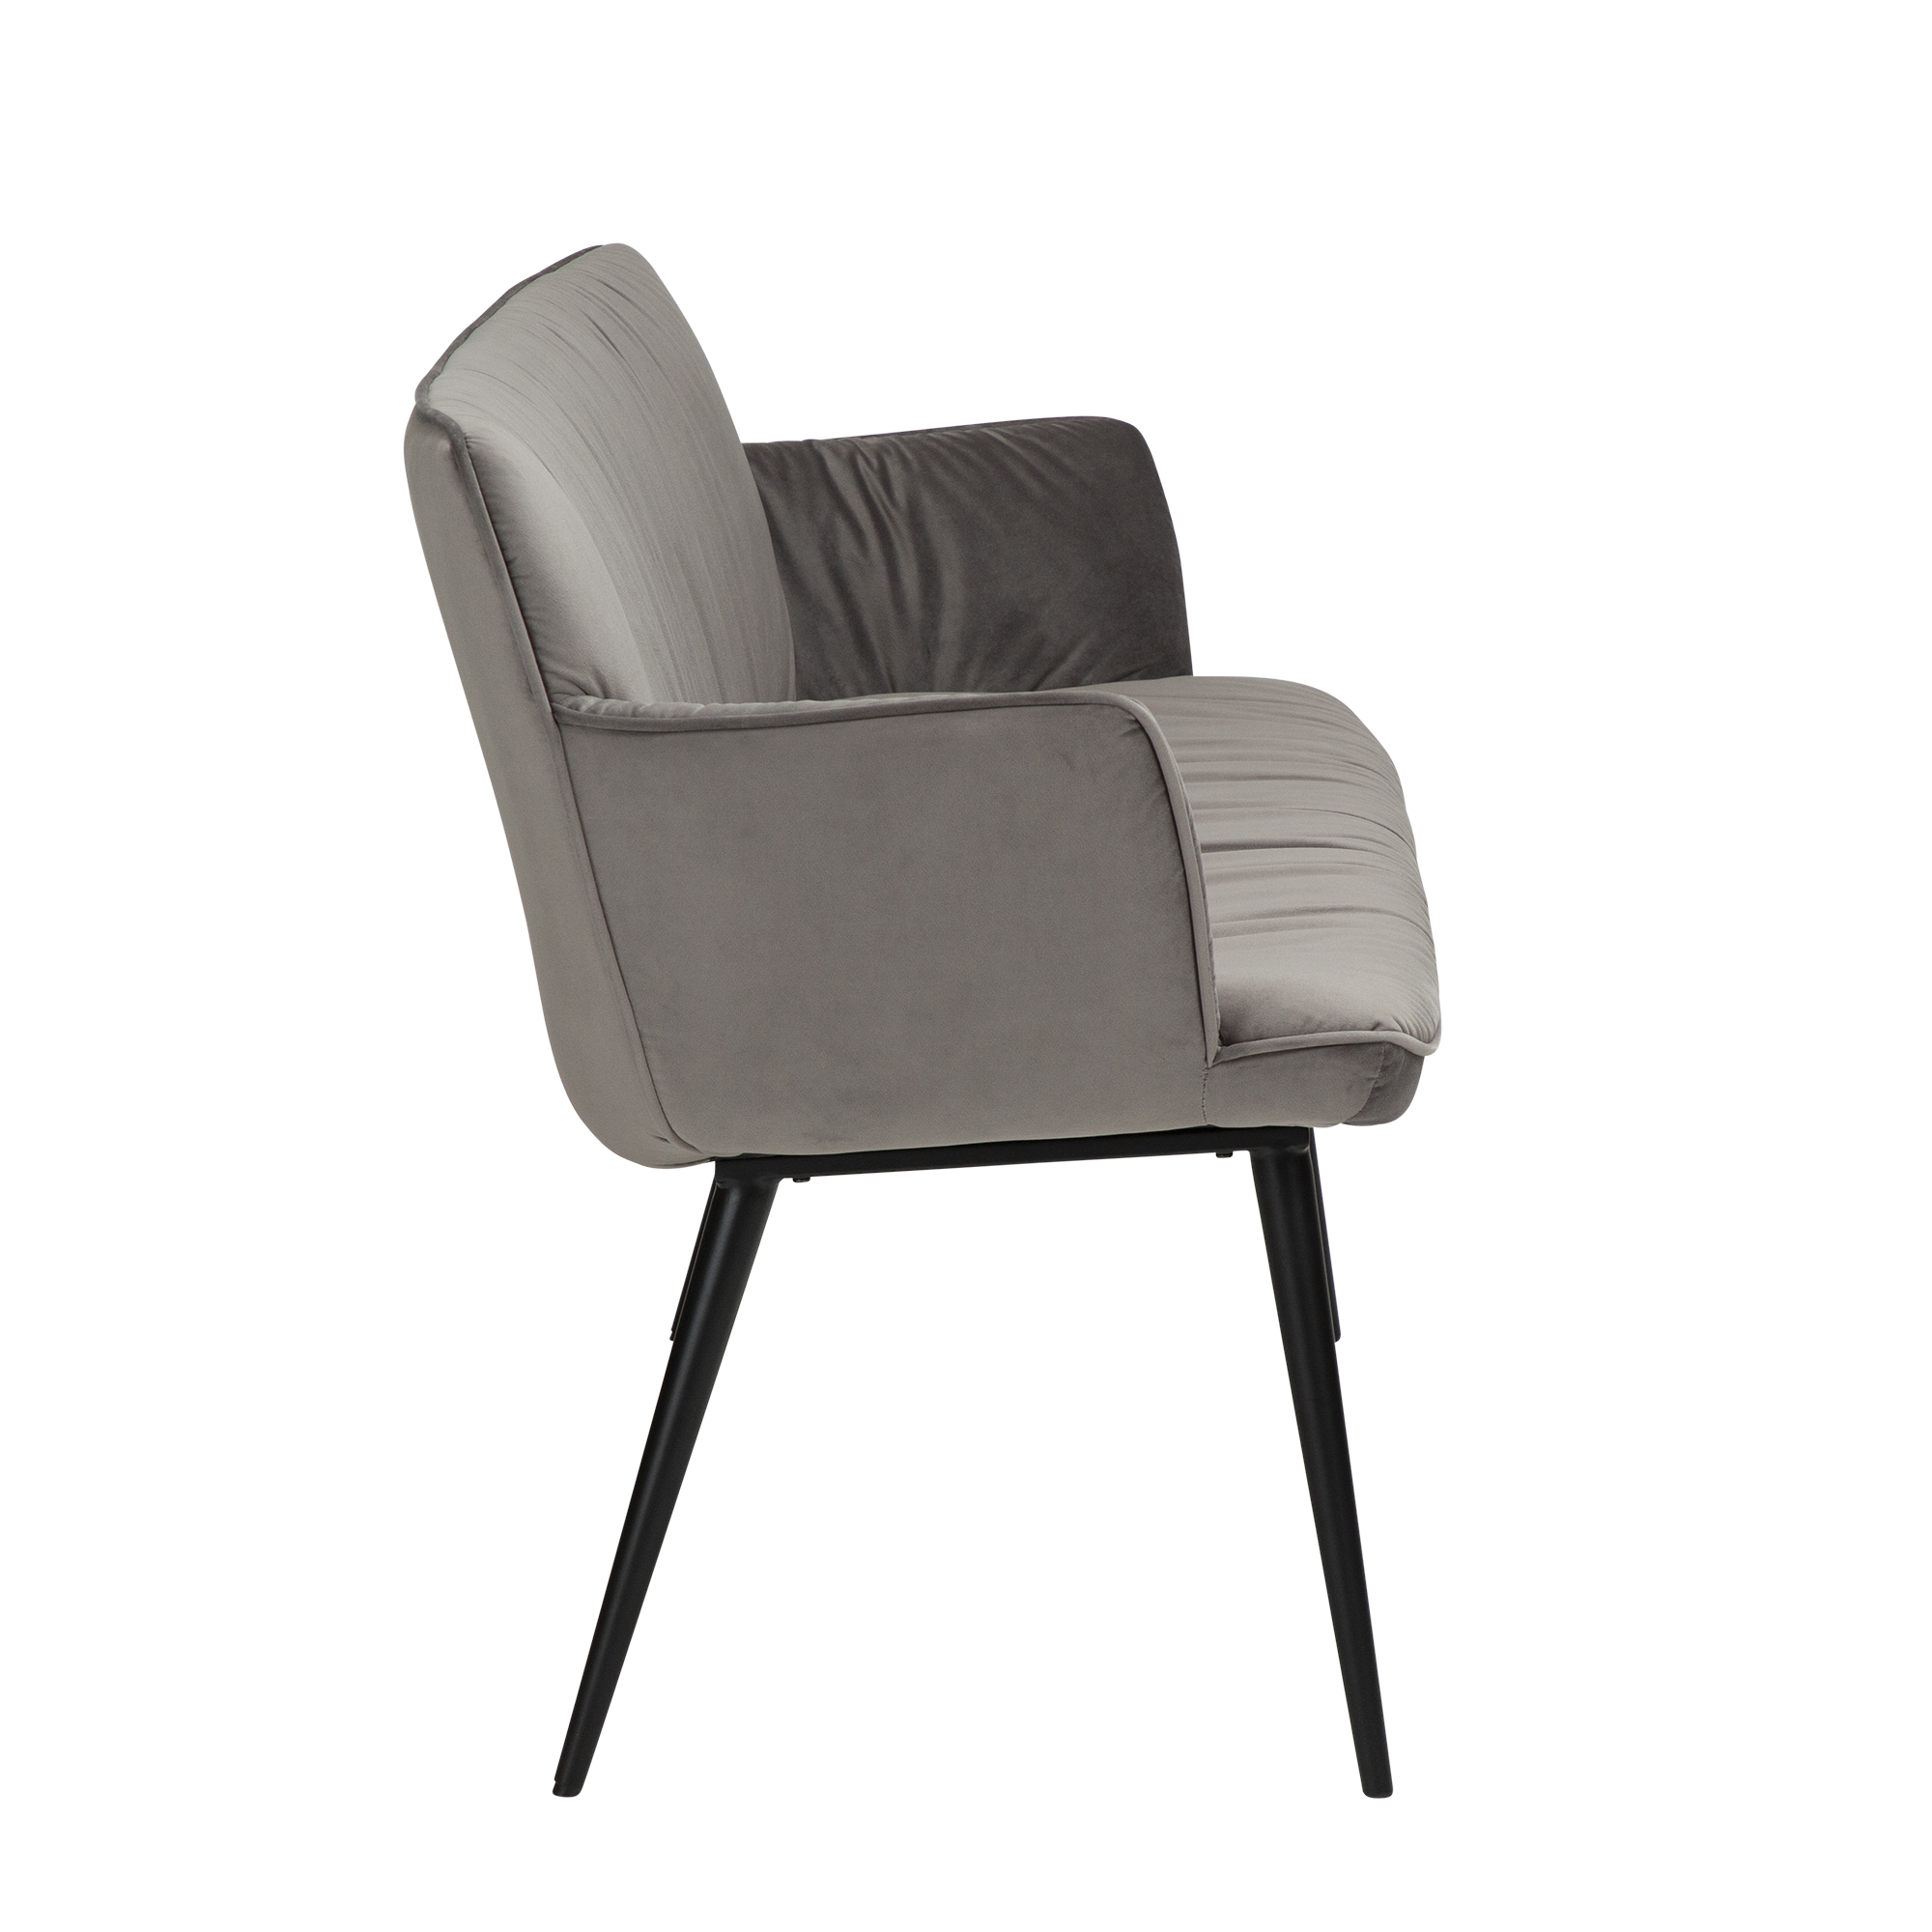 Join Bench Alu Velvet With Black Conical Metal Legs 700680110 03 Profile